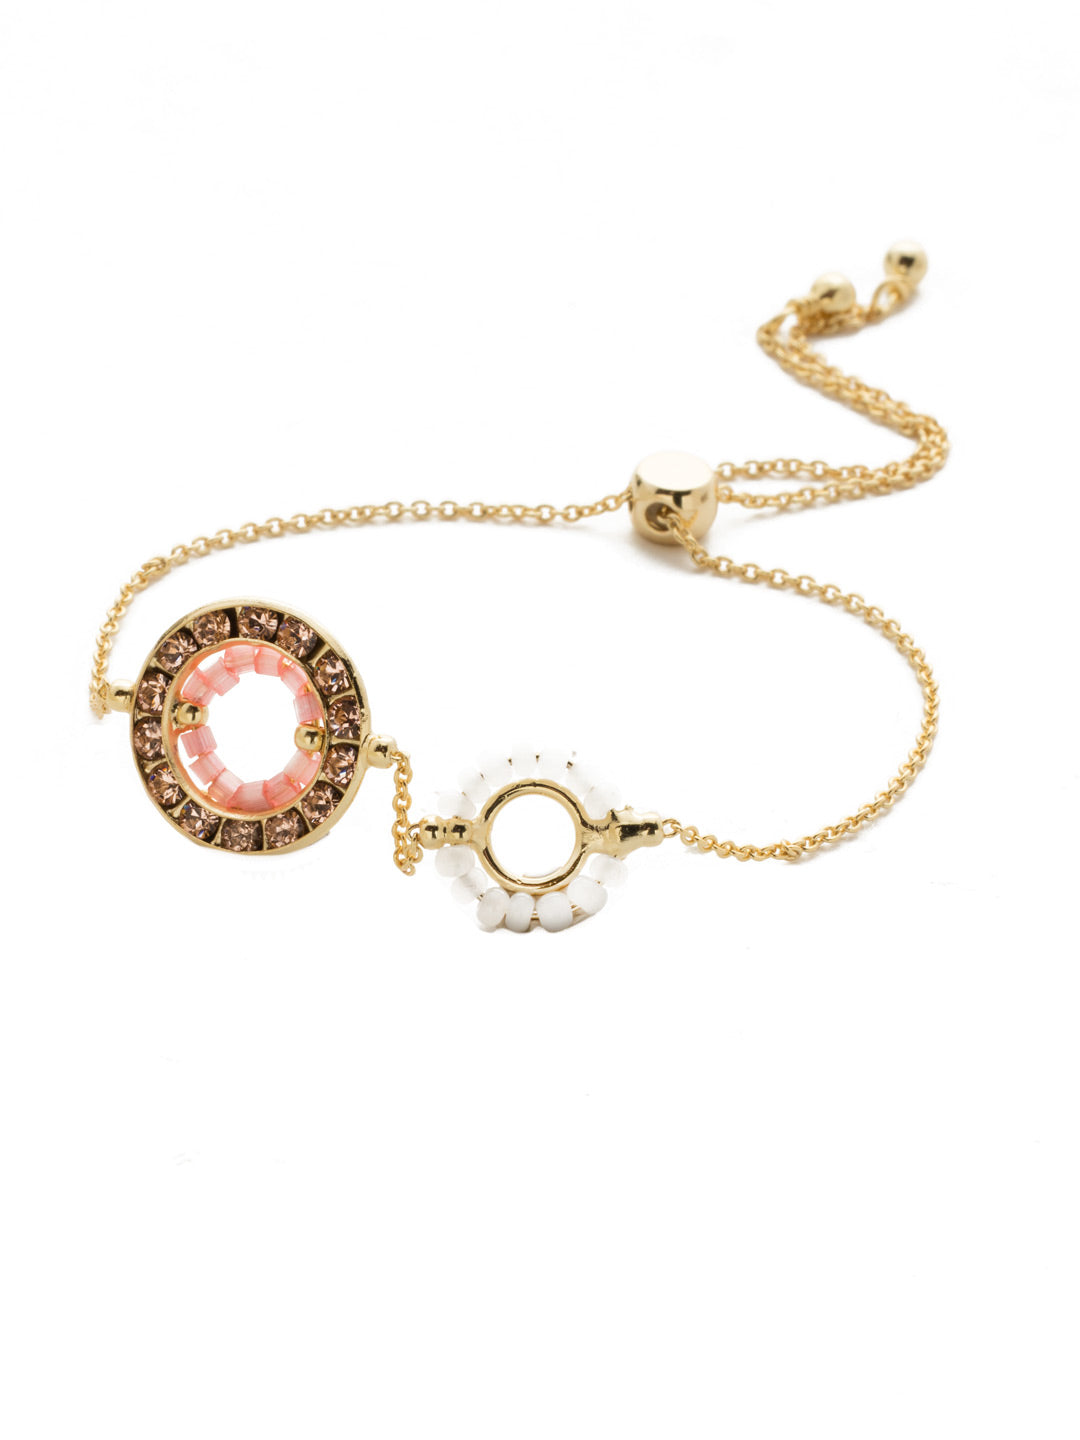 Fire & Ice Slider Bracelet - BEH4BGISS - Slip on and adjust this stylish bead and crystal combo and you'll immediately feel like you've been transported to a special getaway spot. From Sorrelli's Island Sun collection in our Bright Gold-tone finish.